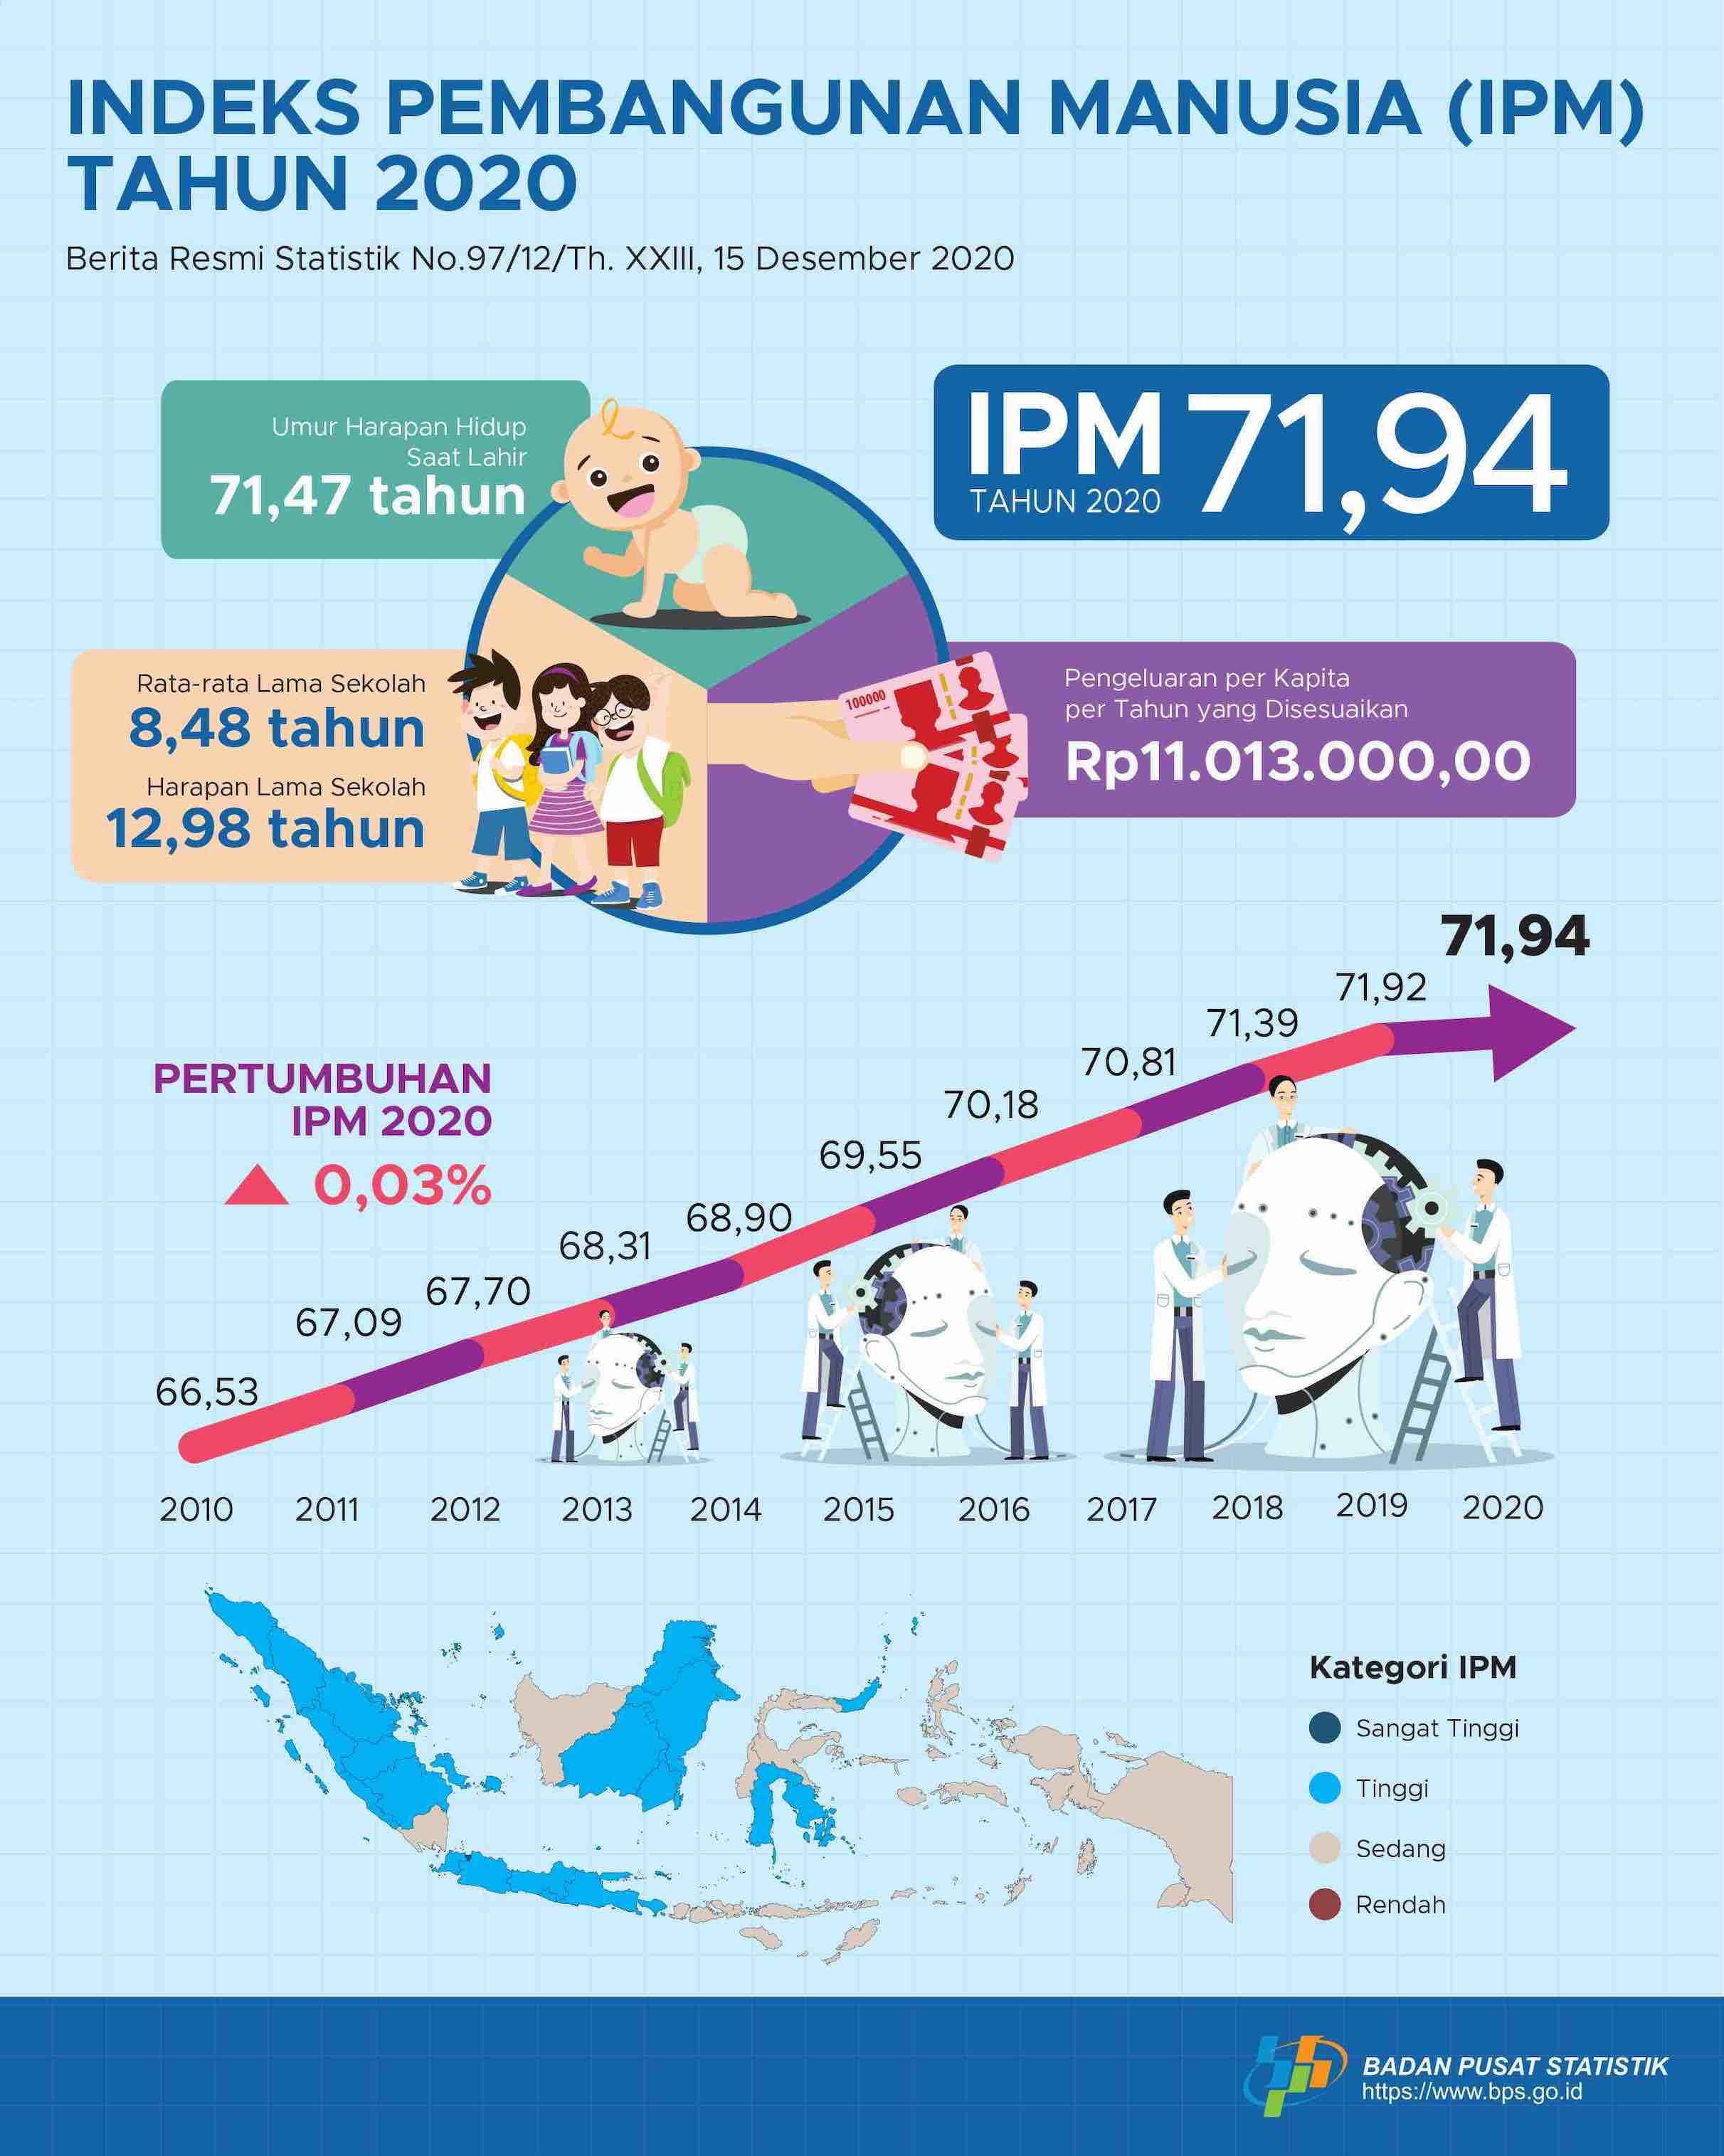 Indonesia's Human Development Index (HDI) in 2020 reached 71.94